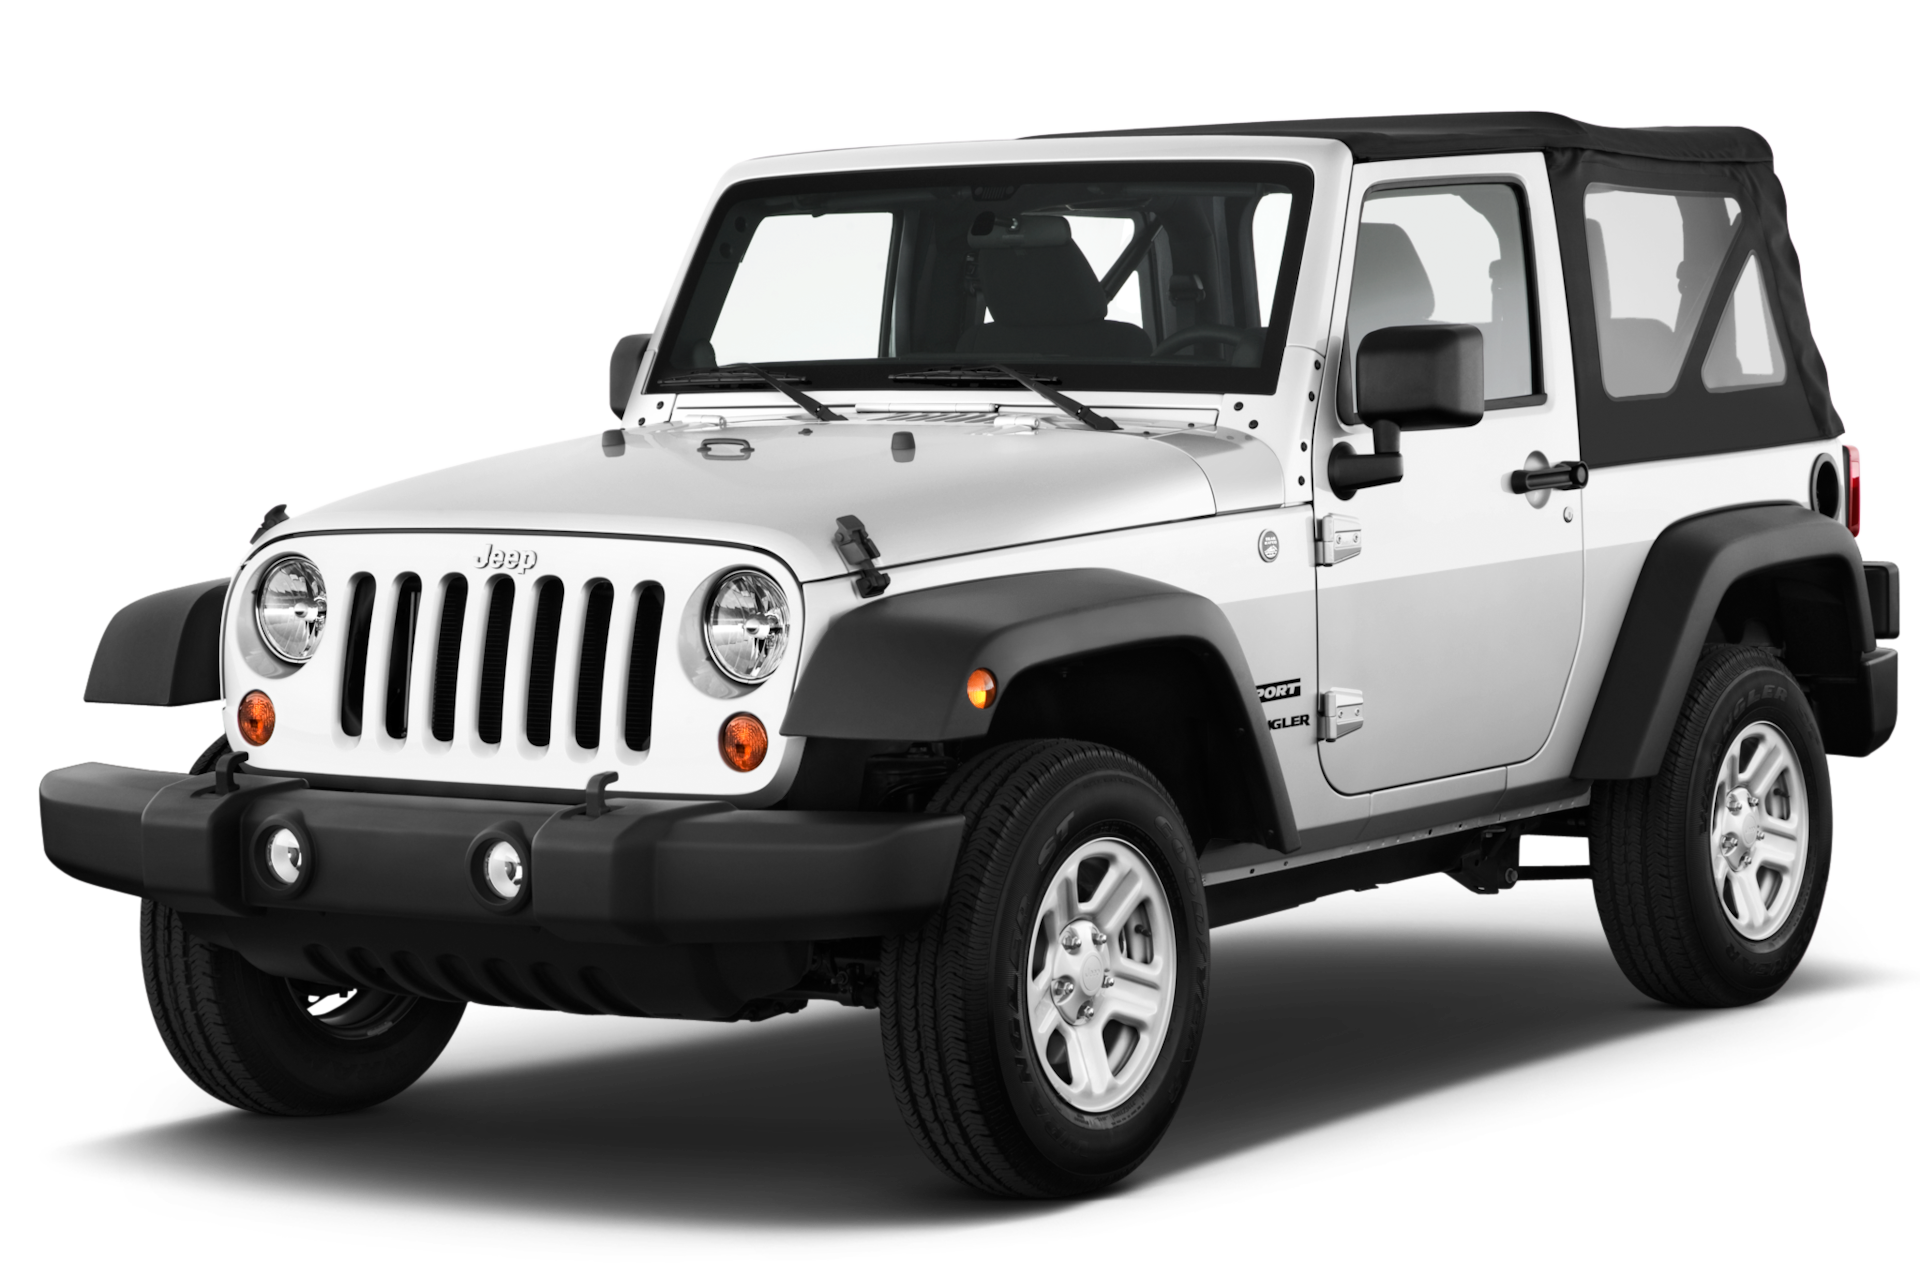 2015 Jeep Wrangler Prices, Reviews, and Photos - MotorTrend